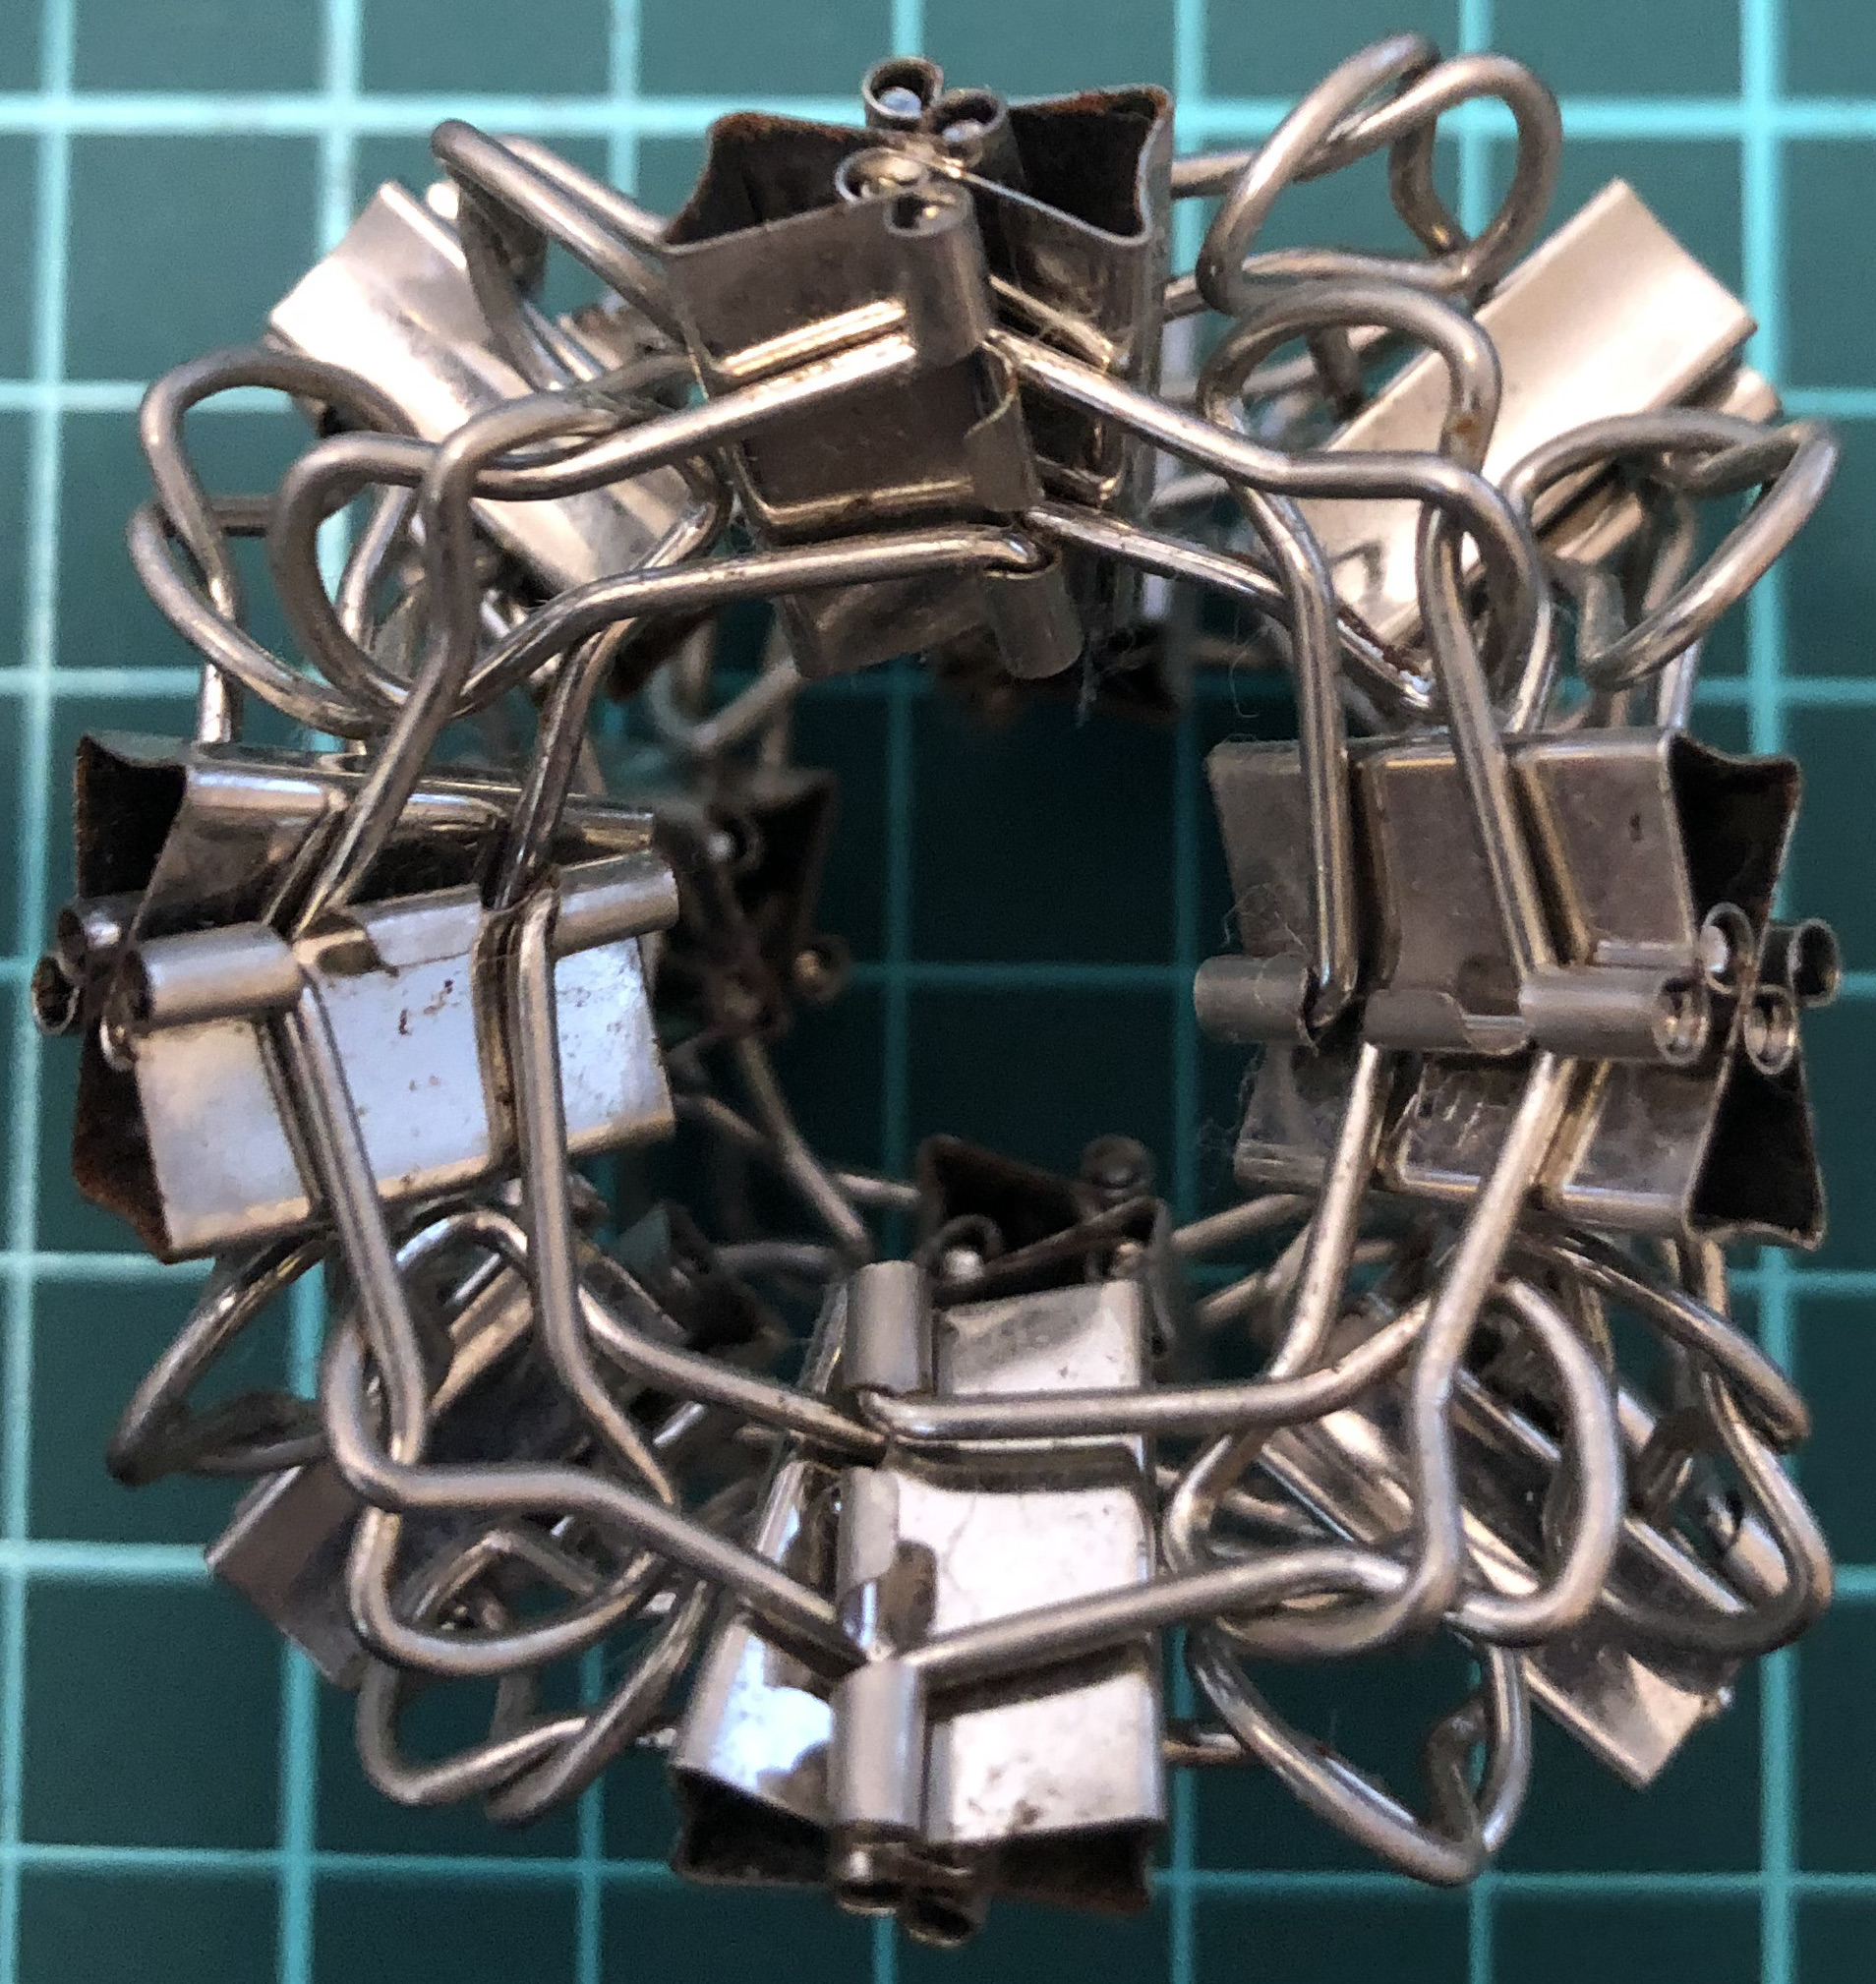 24 clips forming 12 X-edges forming cube